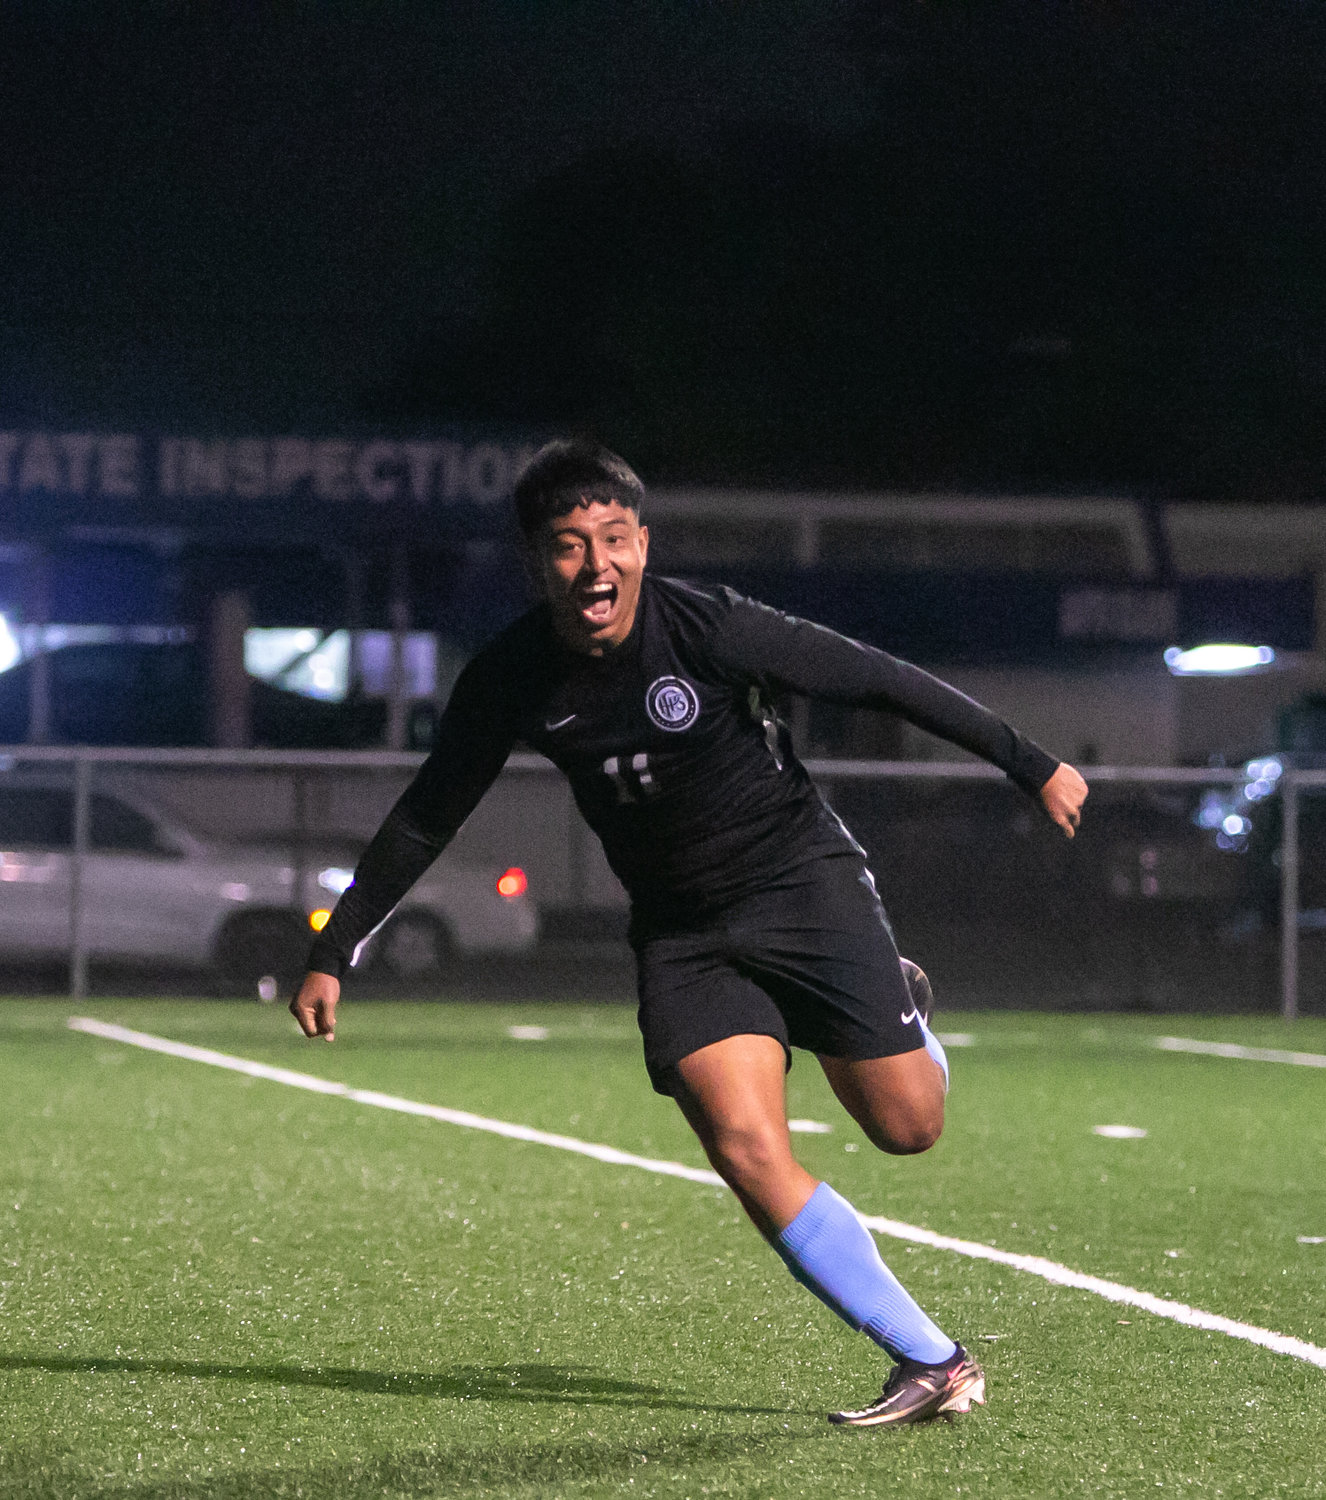 Jose Dominguez celebrates after scoring a goal during Tuesday's match between Paetow and Lamar at the Spring Woods football field.